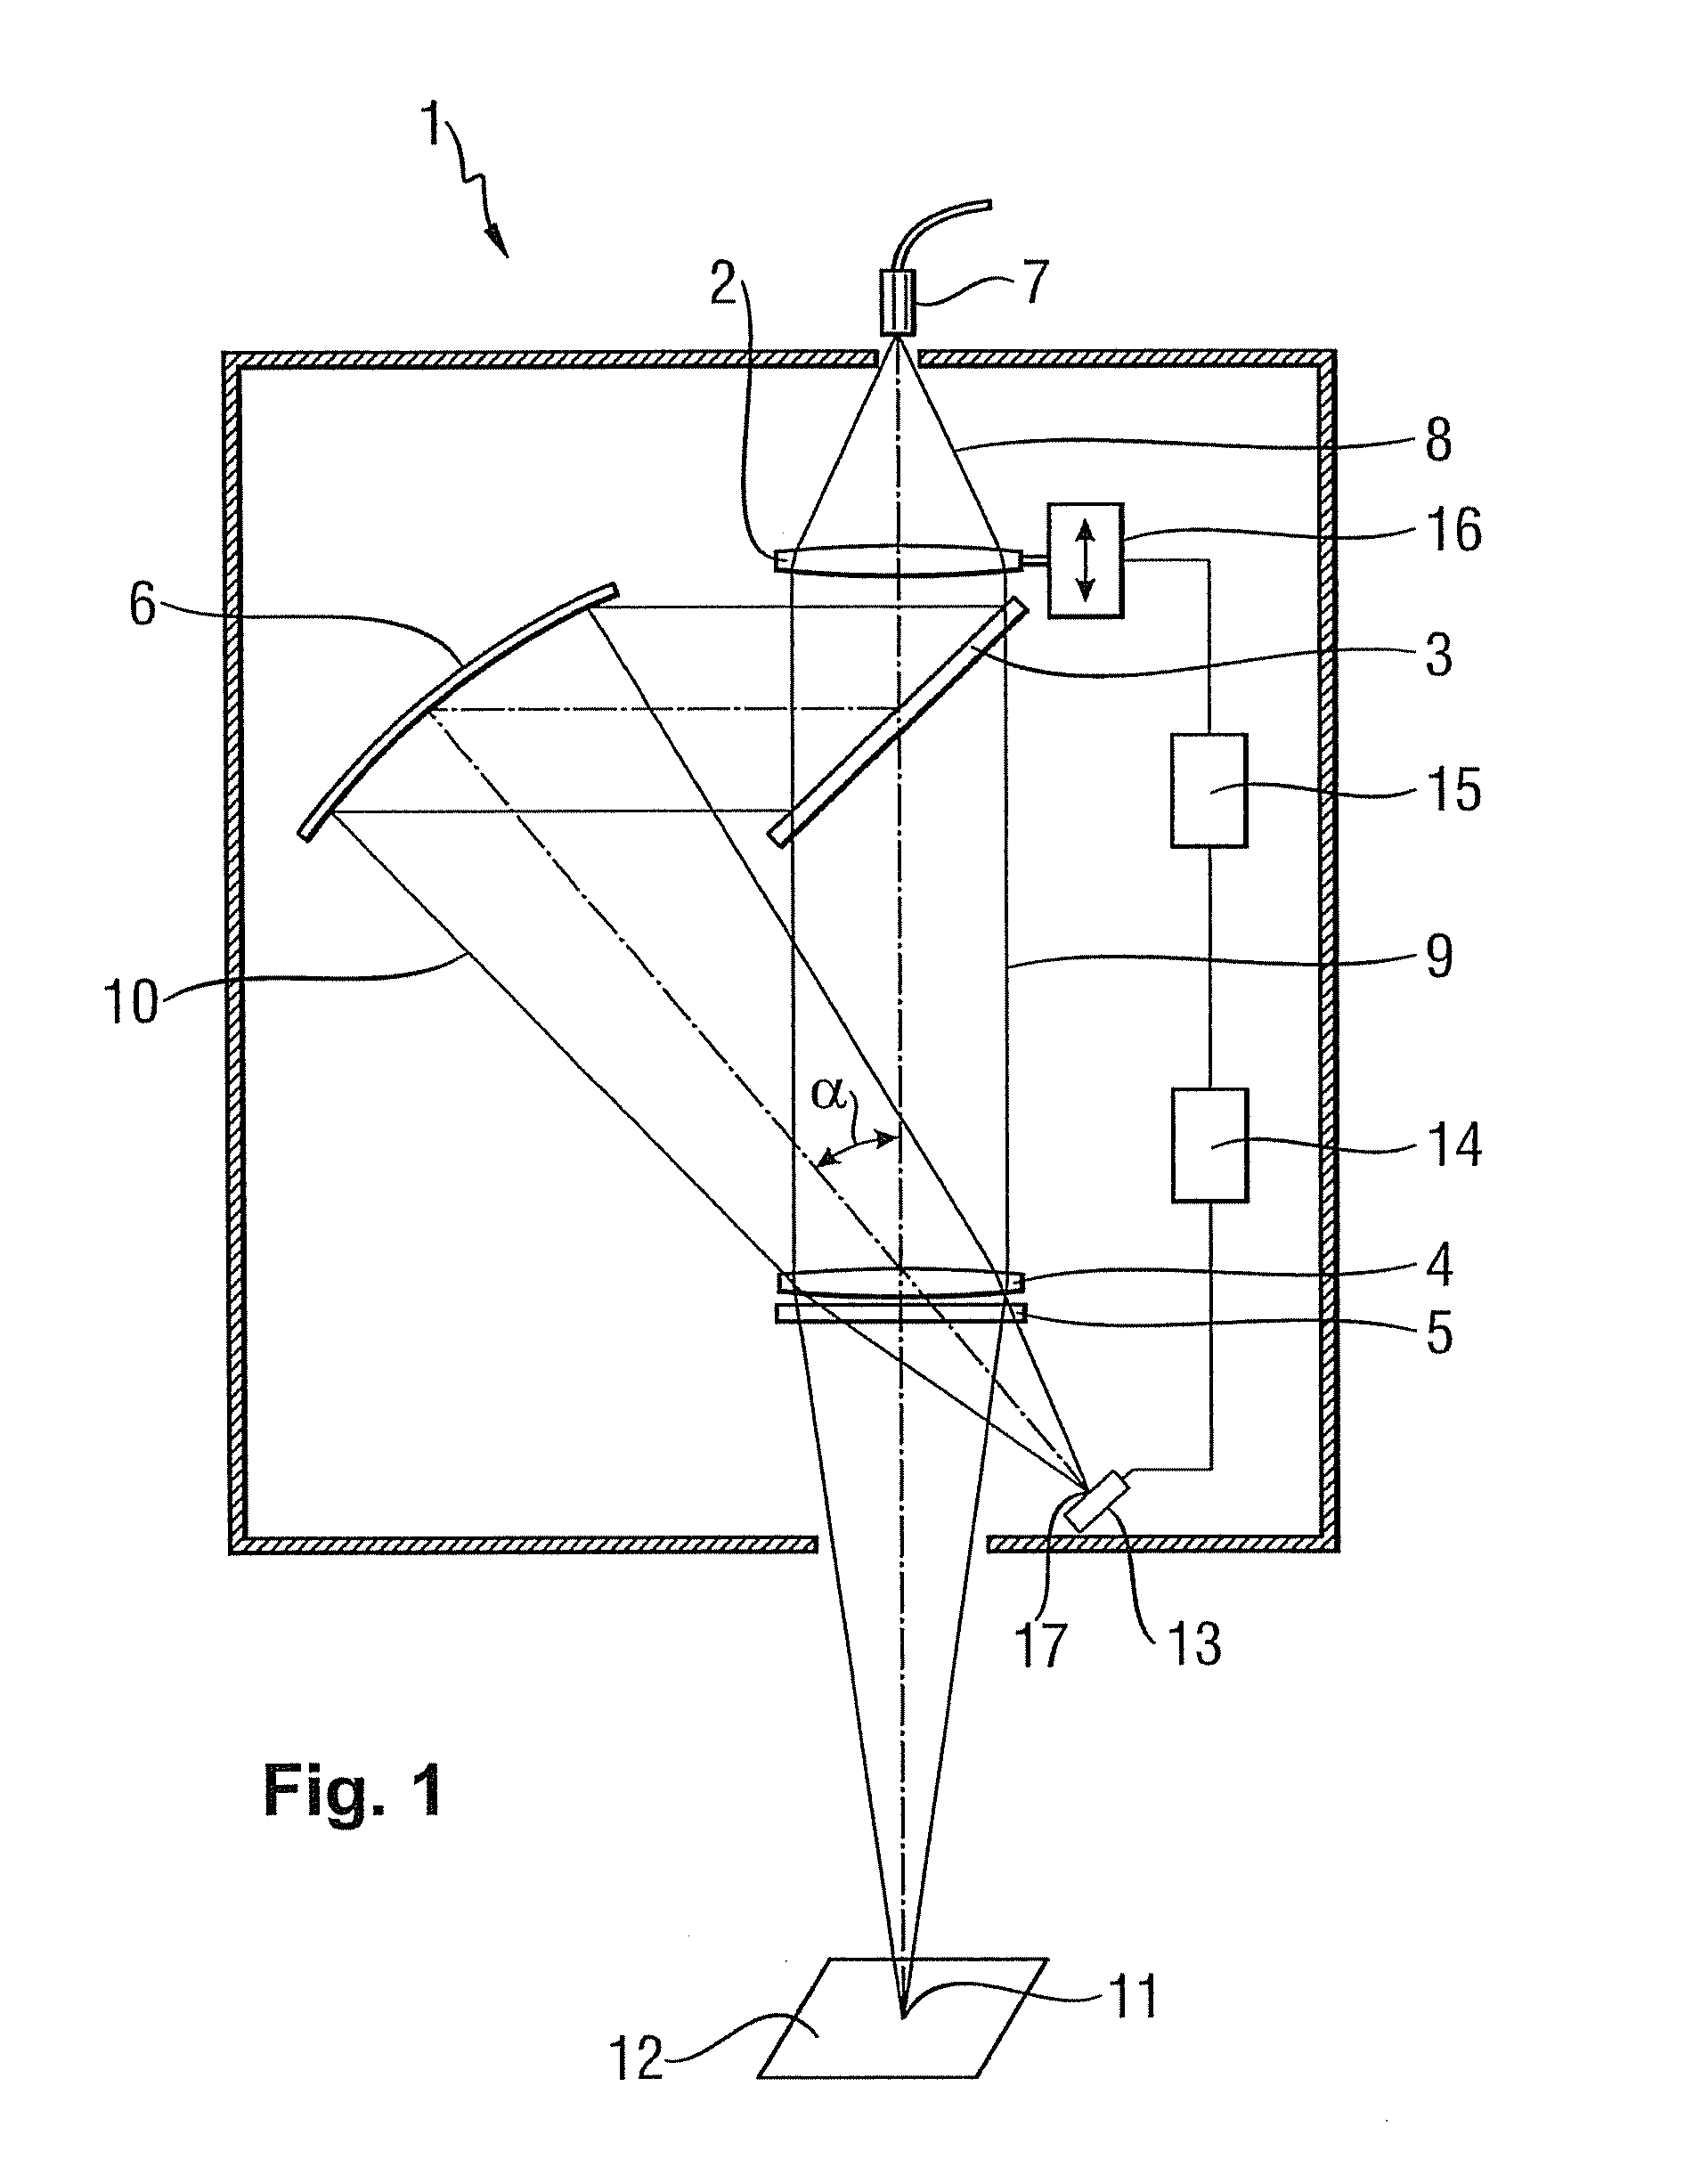 Laser Machining Head with Integrated Sensor Device for Focus Position Monitoring